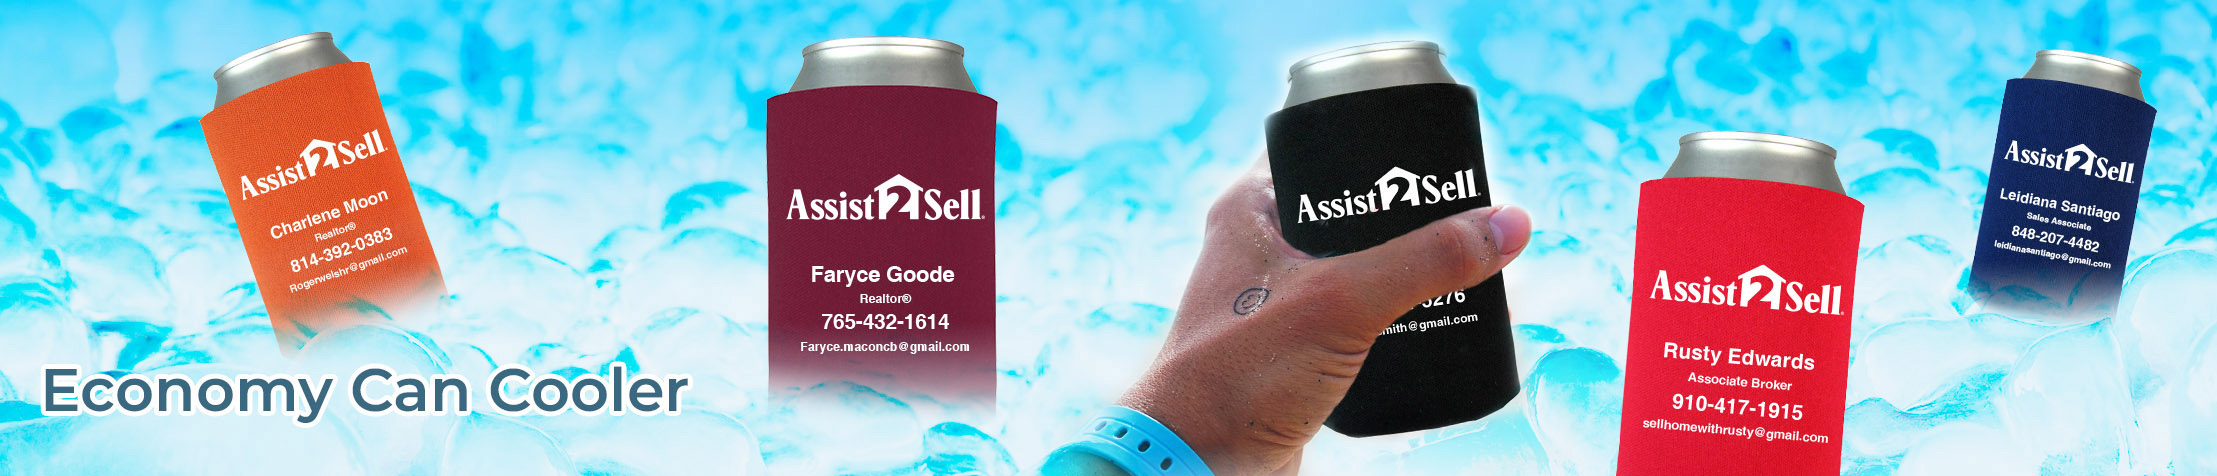 Assit2Sell Real Estate Economy Can Cooler - Assit2Sell Real Estate  personalized realtor promotional products | BestPrintBuy.com